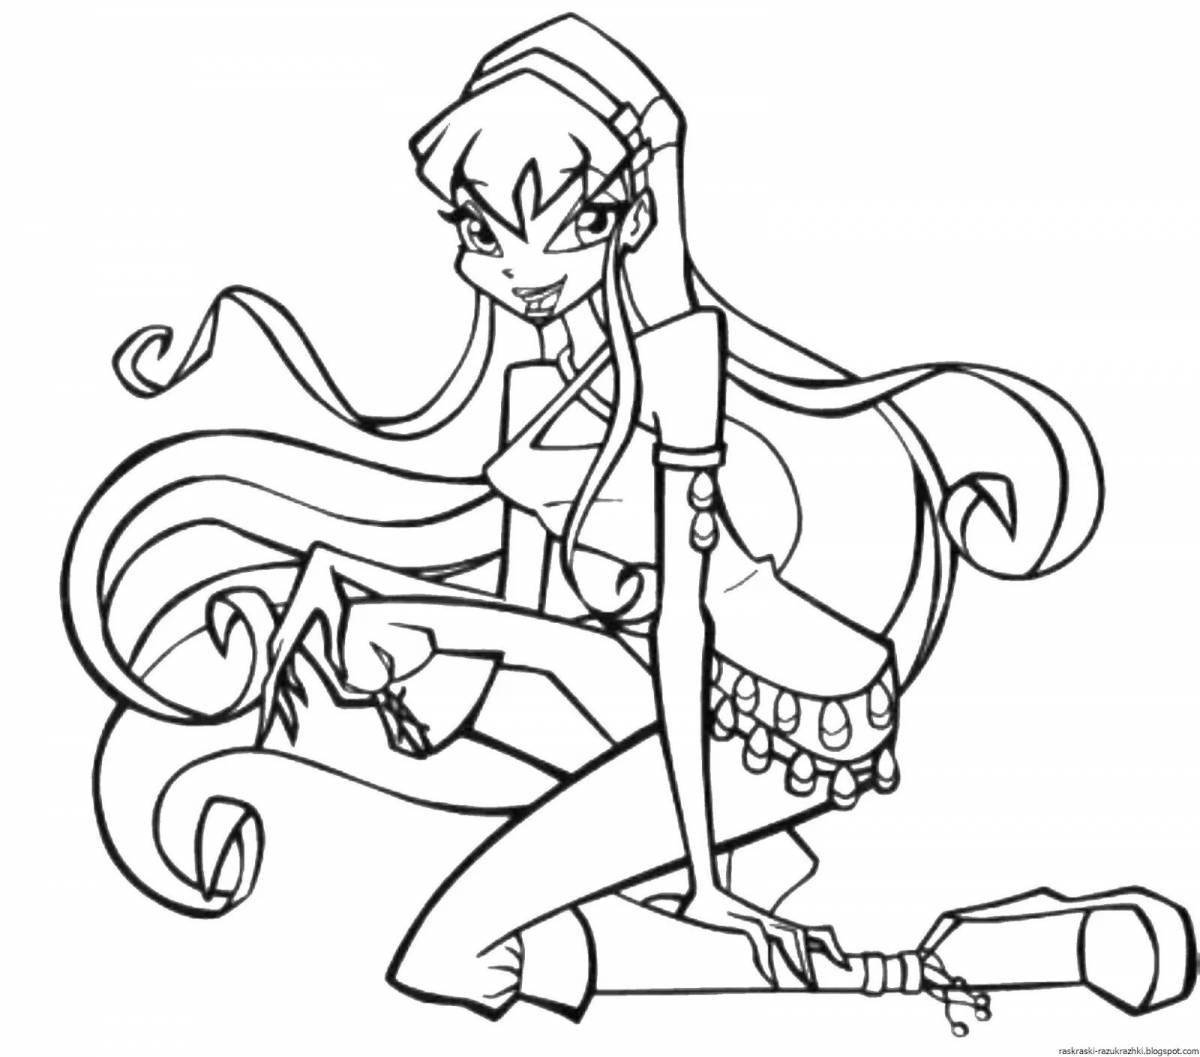 Colorful winx coloring game